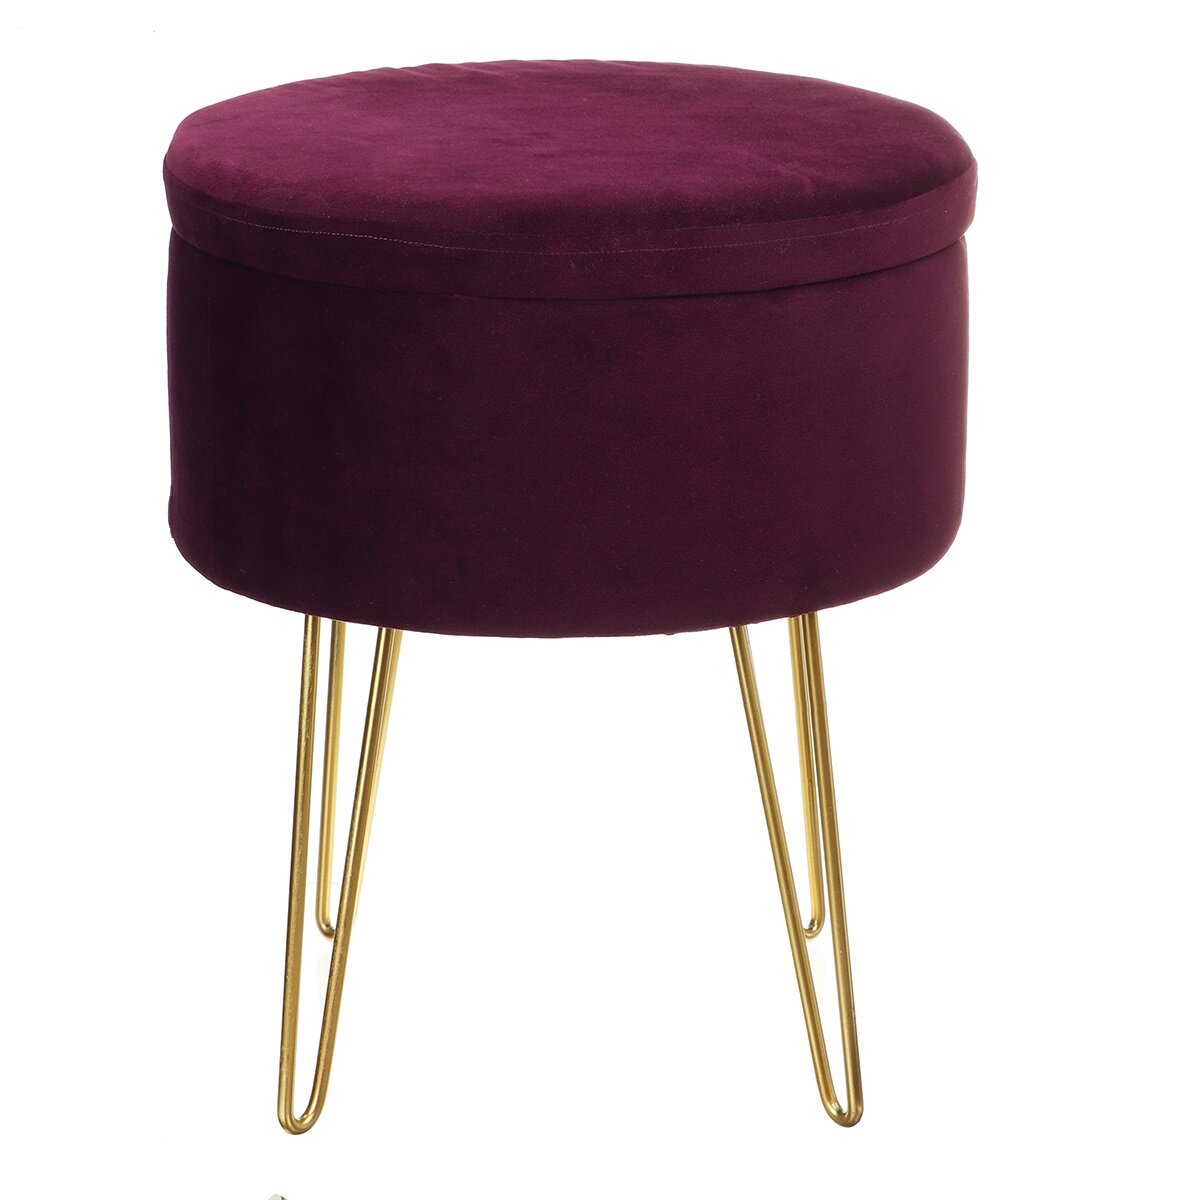 Velvet Storage Footstool Sofa Ottoman Footrest Makeup Dressing Table Stool Storage Box Bench Seat Chair Home Office Furn